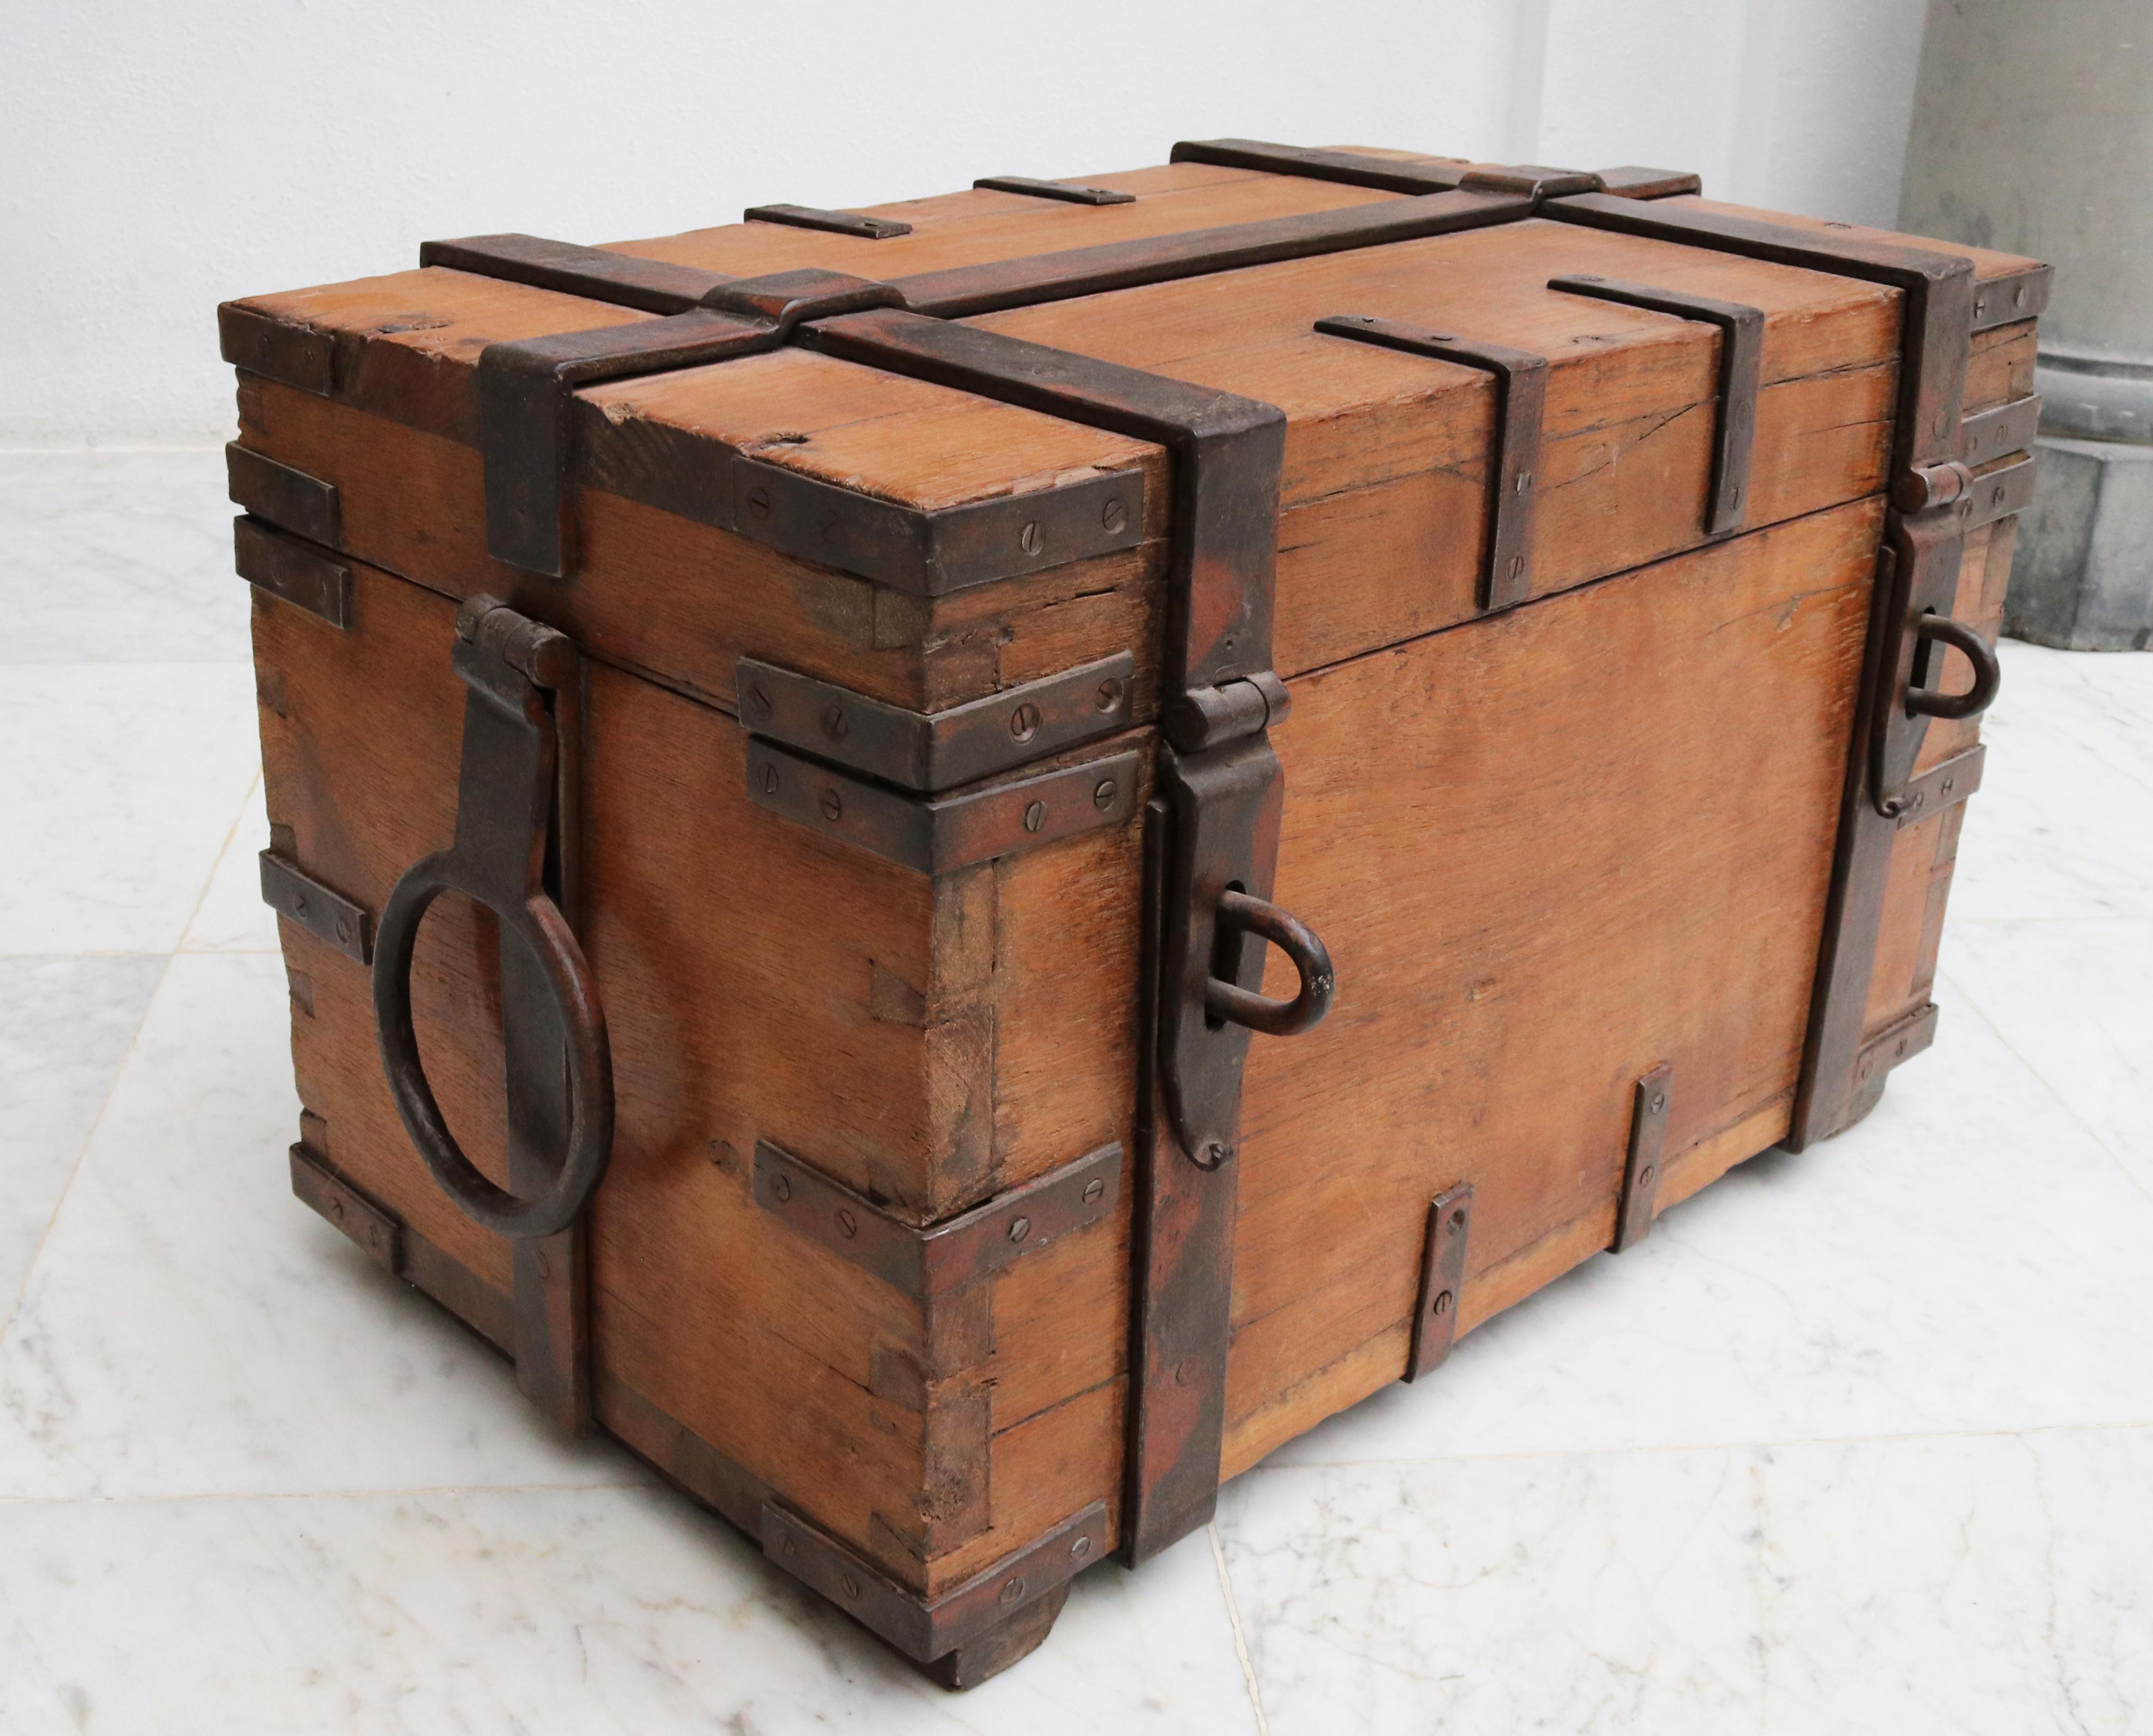 19th century Anglo-Indian colonial fruit wood chest with wrought iron fittings. 

Robust chest with iron fittings on all sides, rounded handles on the sides and two locks on the front for padlock.